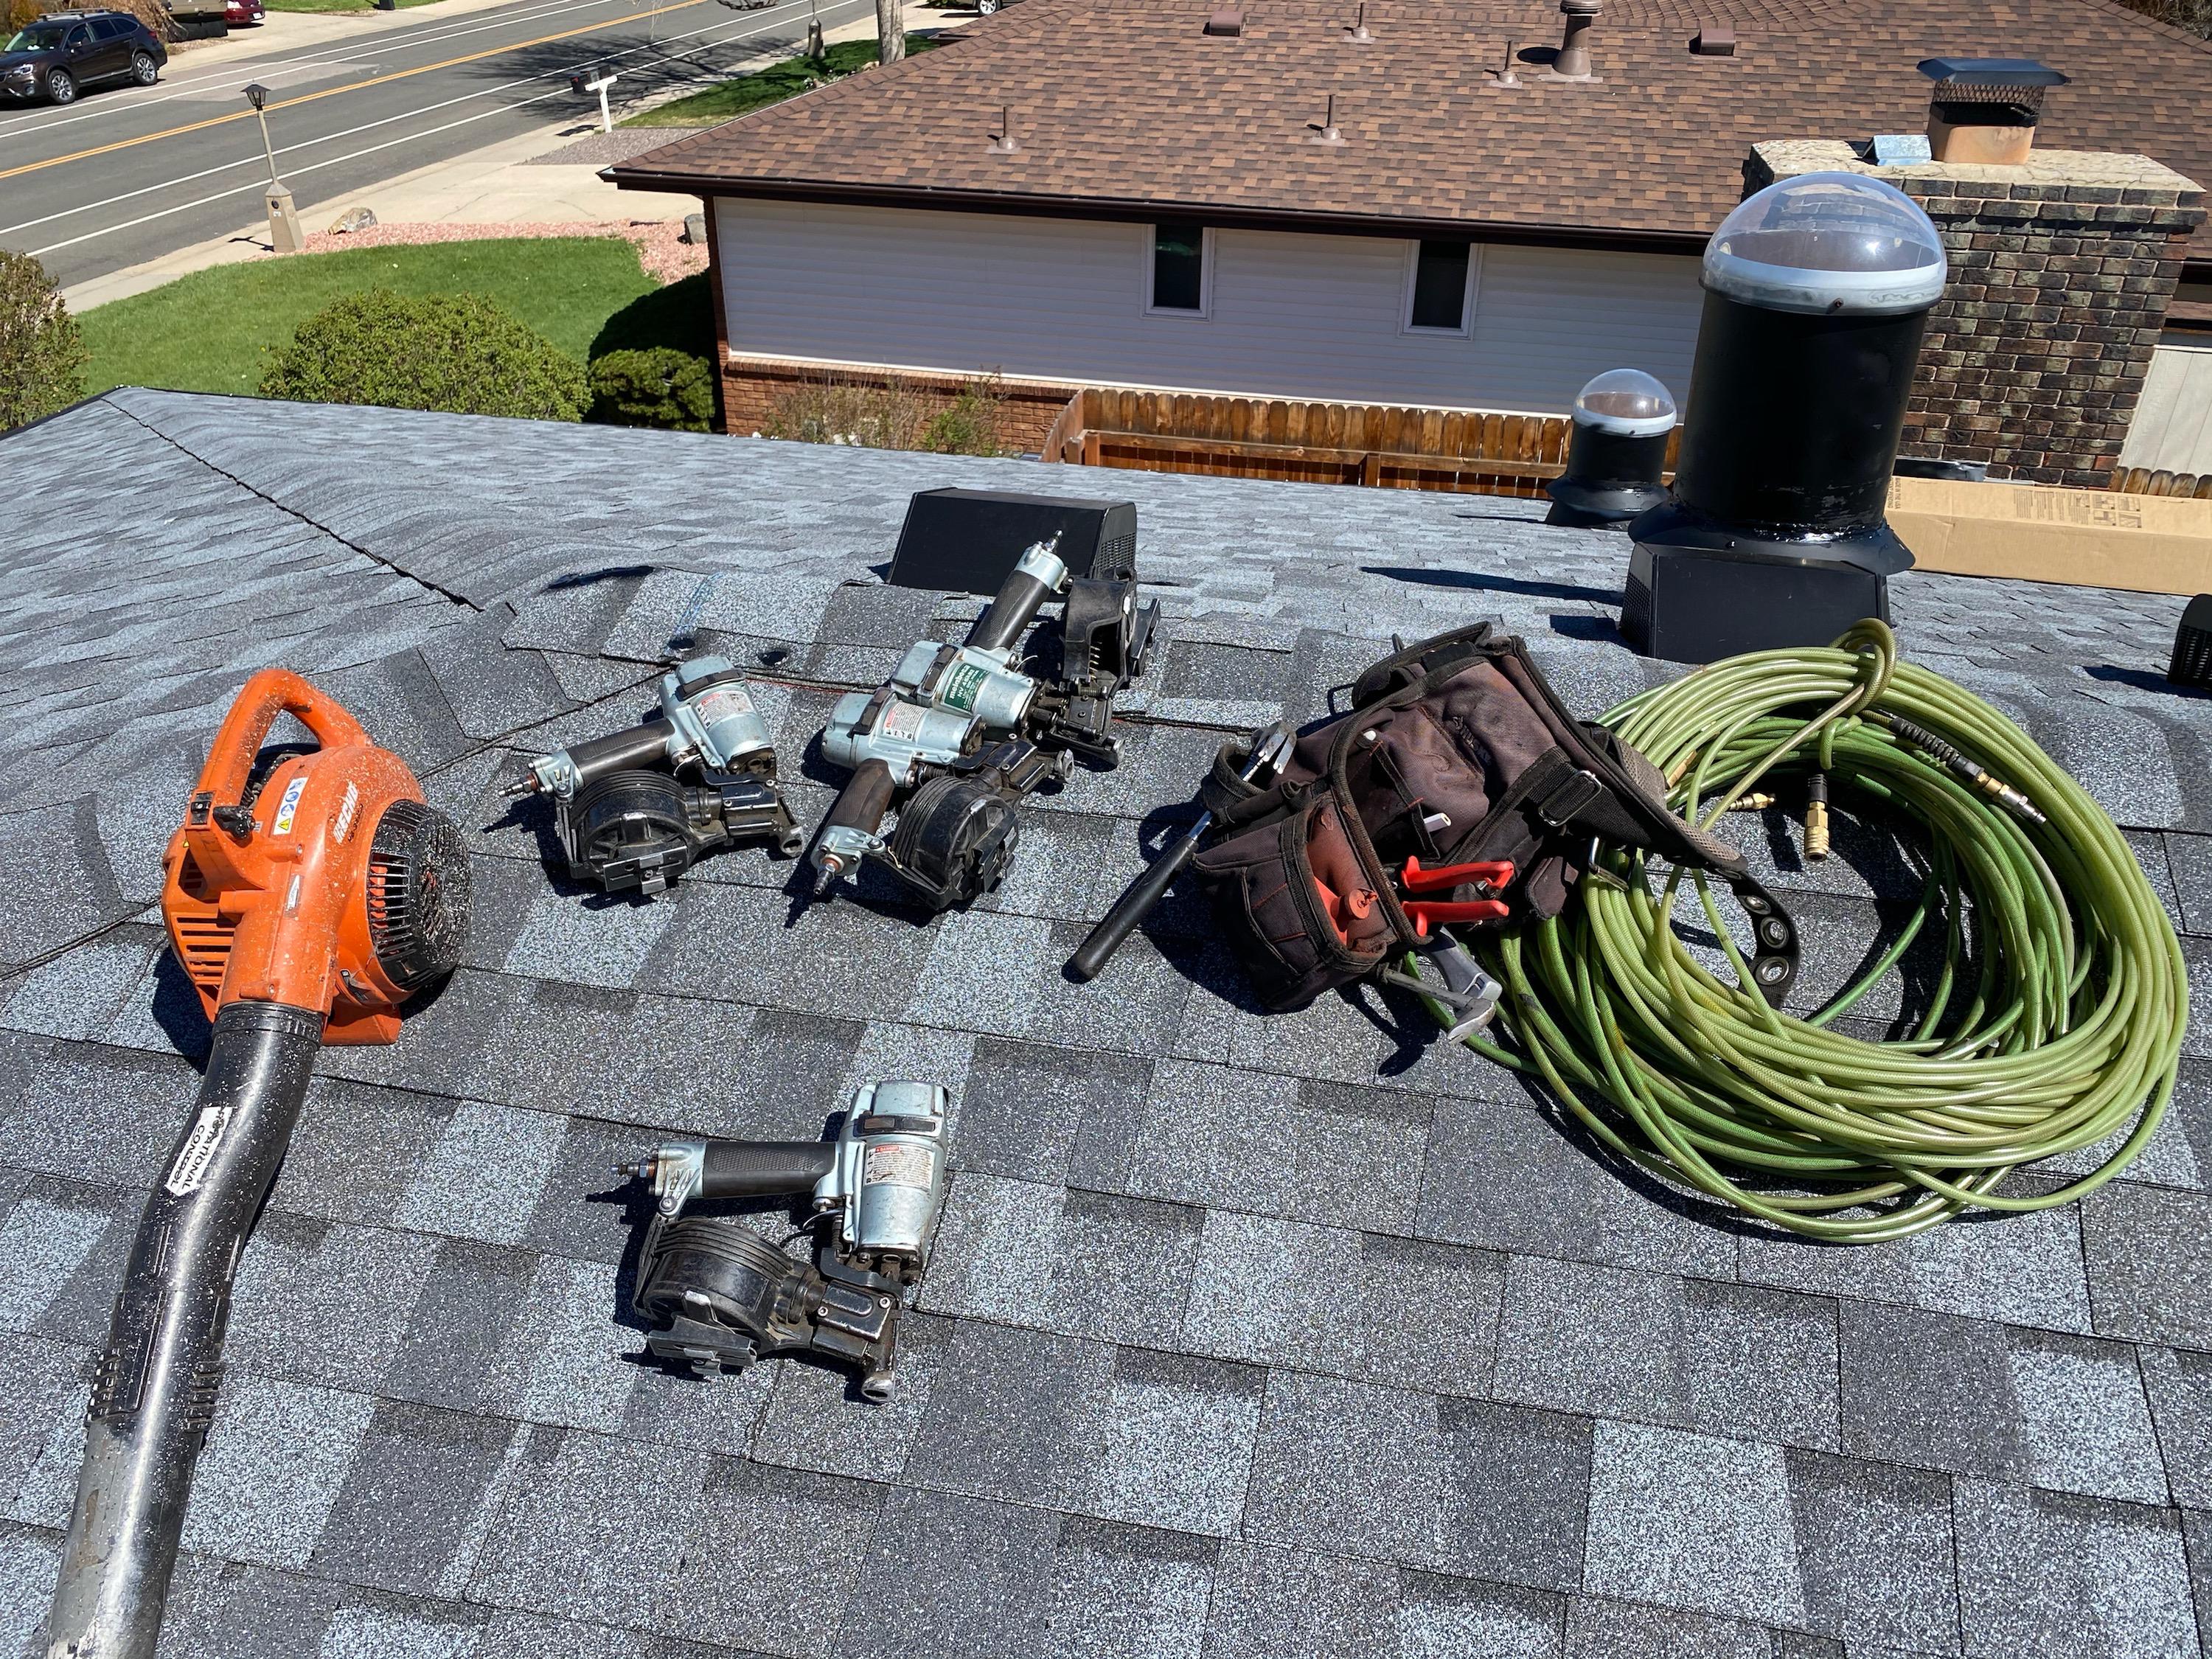 Colorado Roof Toppers Photo